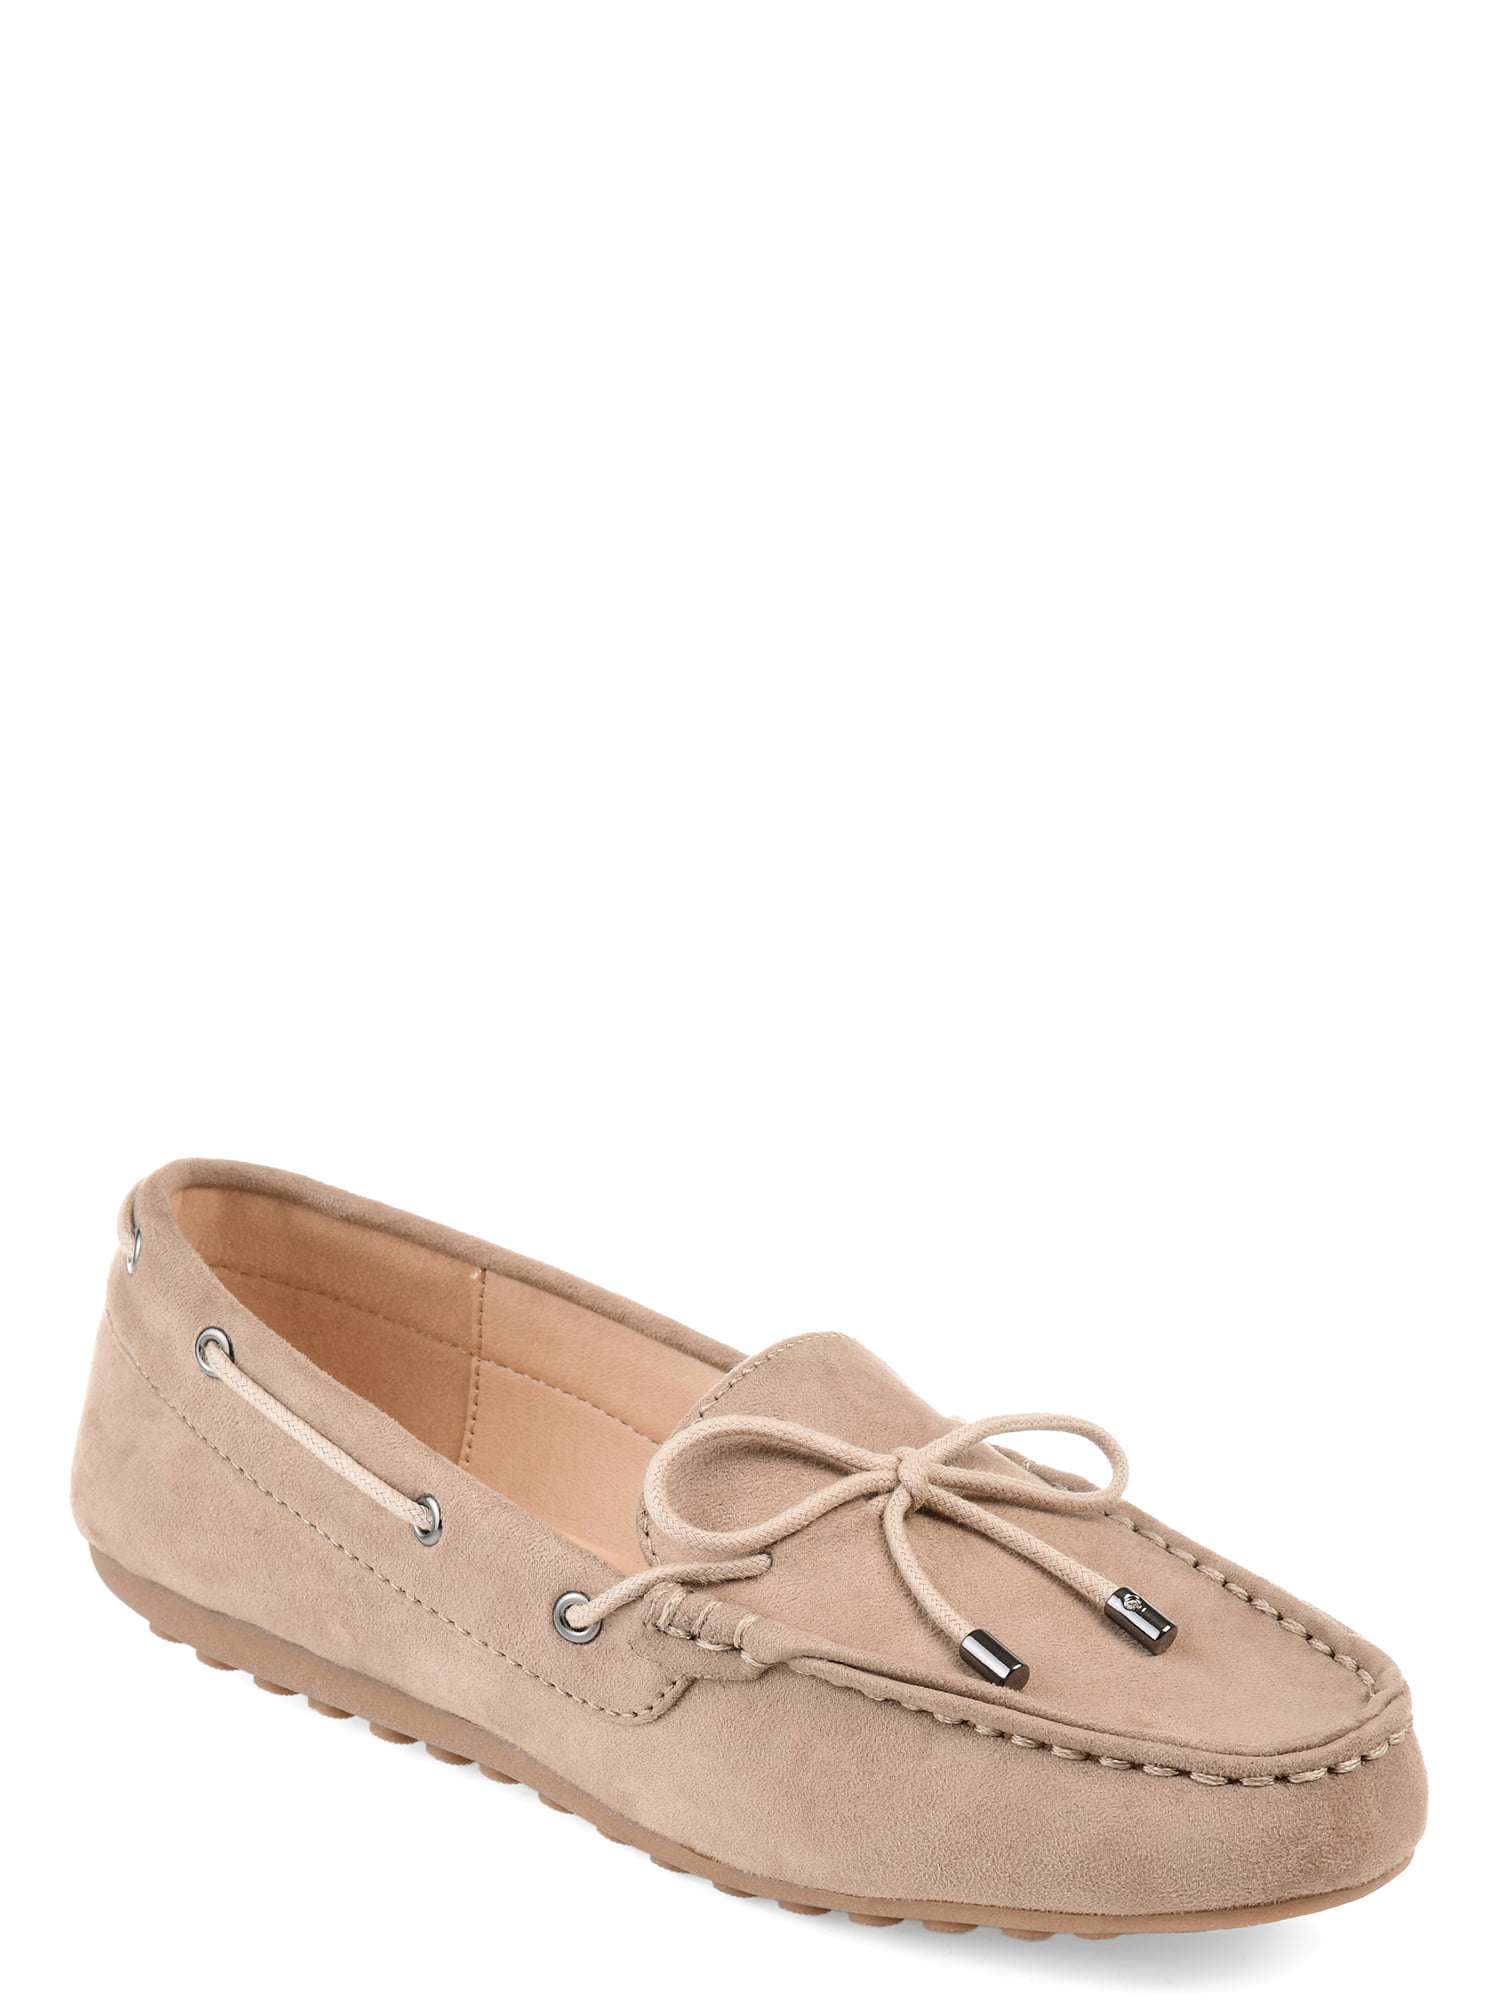 Brinley Co. Womens Comfort-sole Faux Suede Slip-on Loafers - Walmart.com